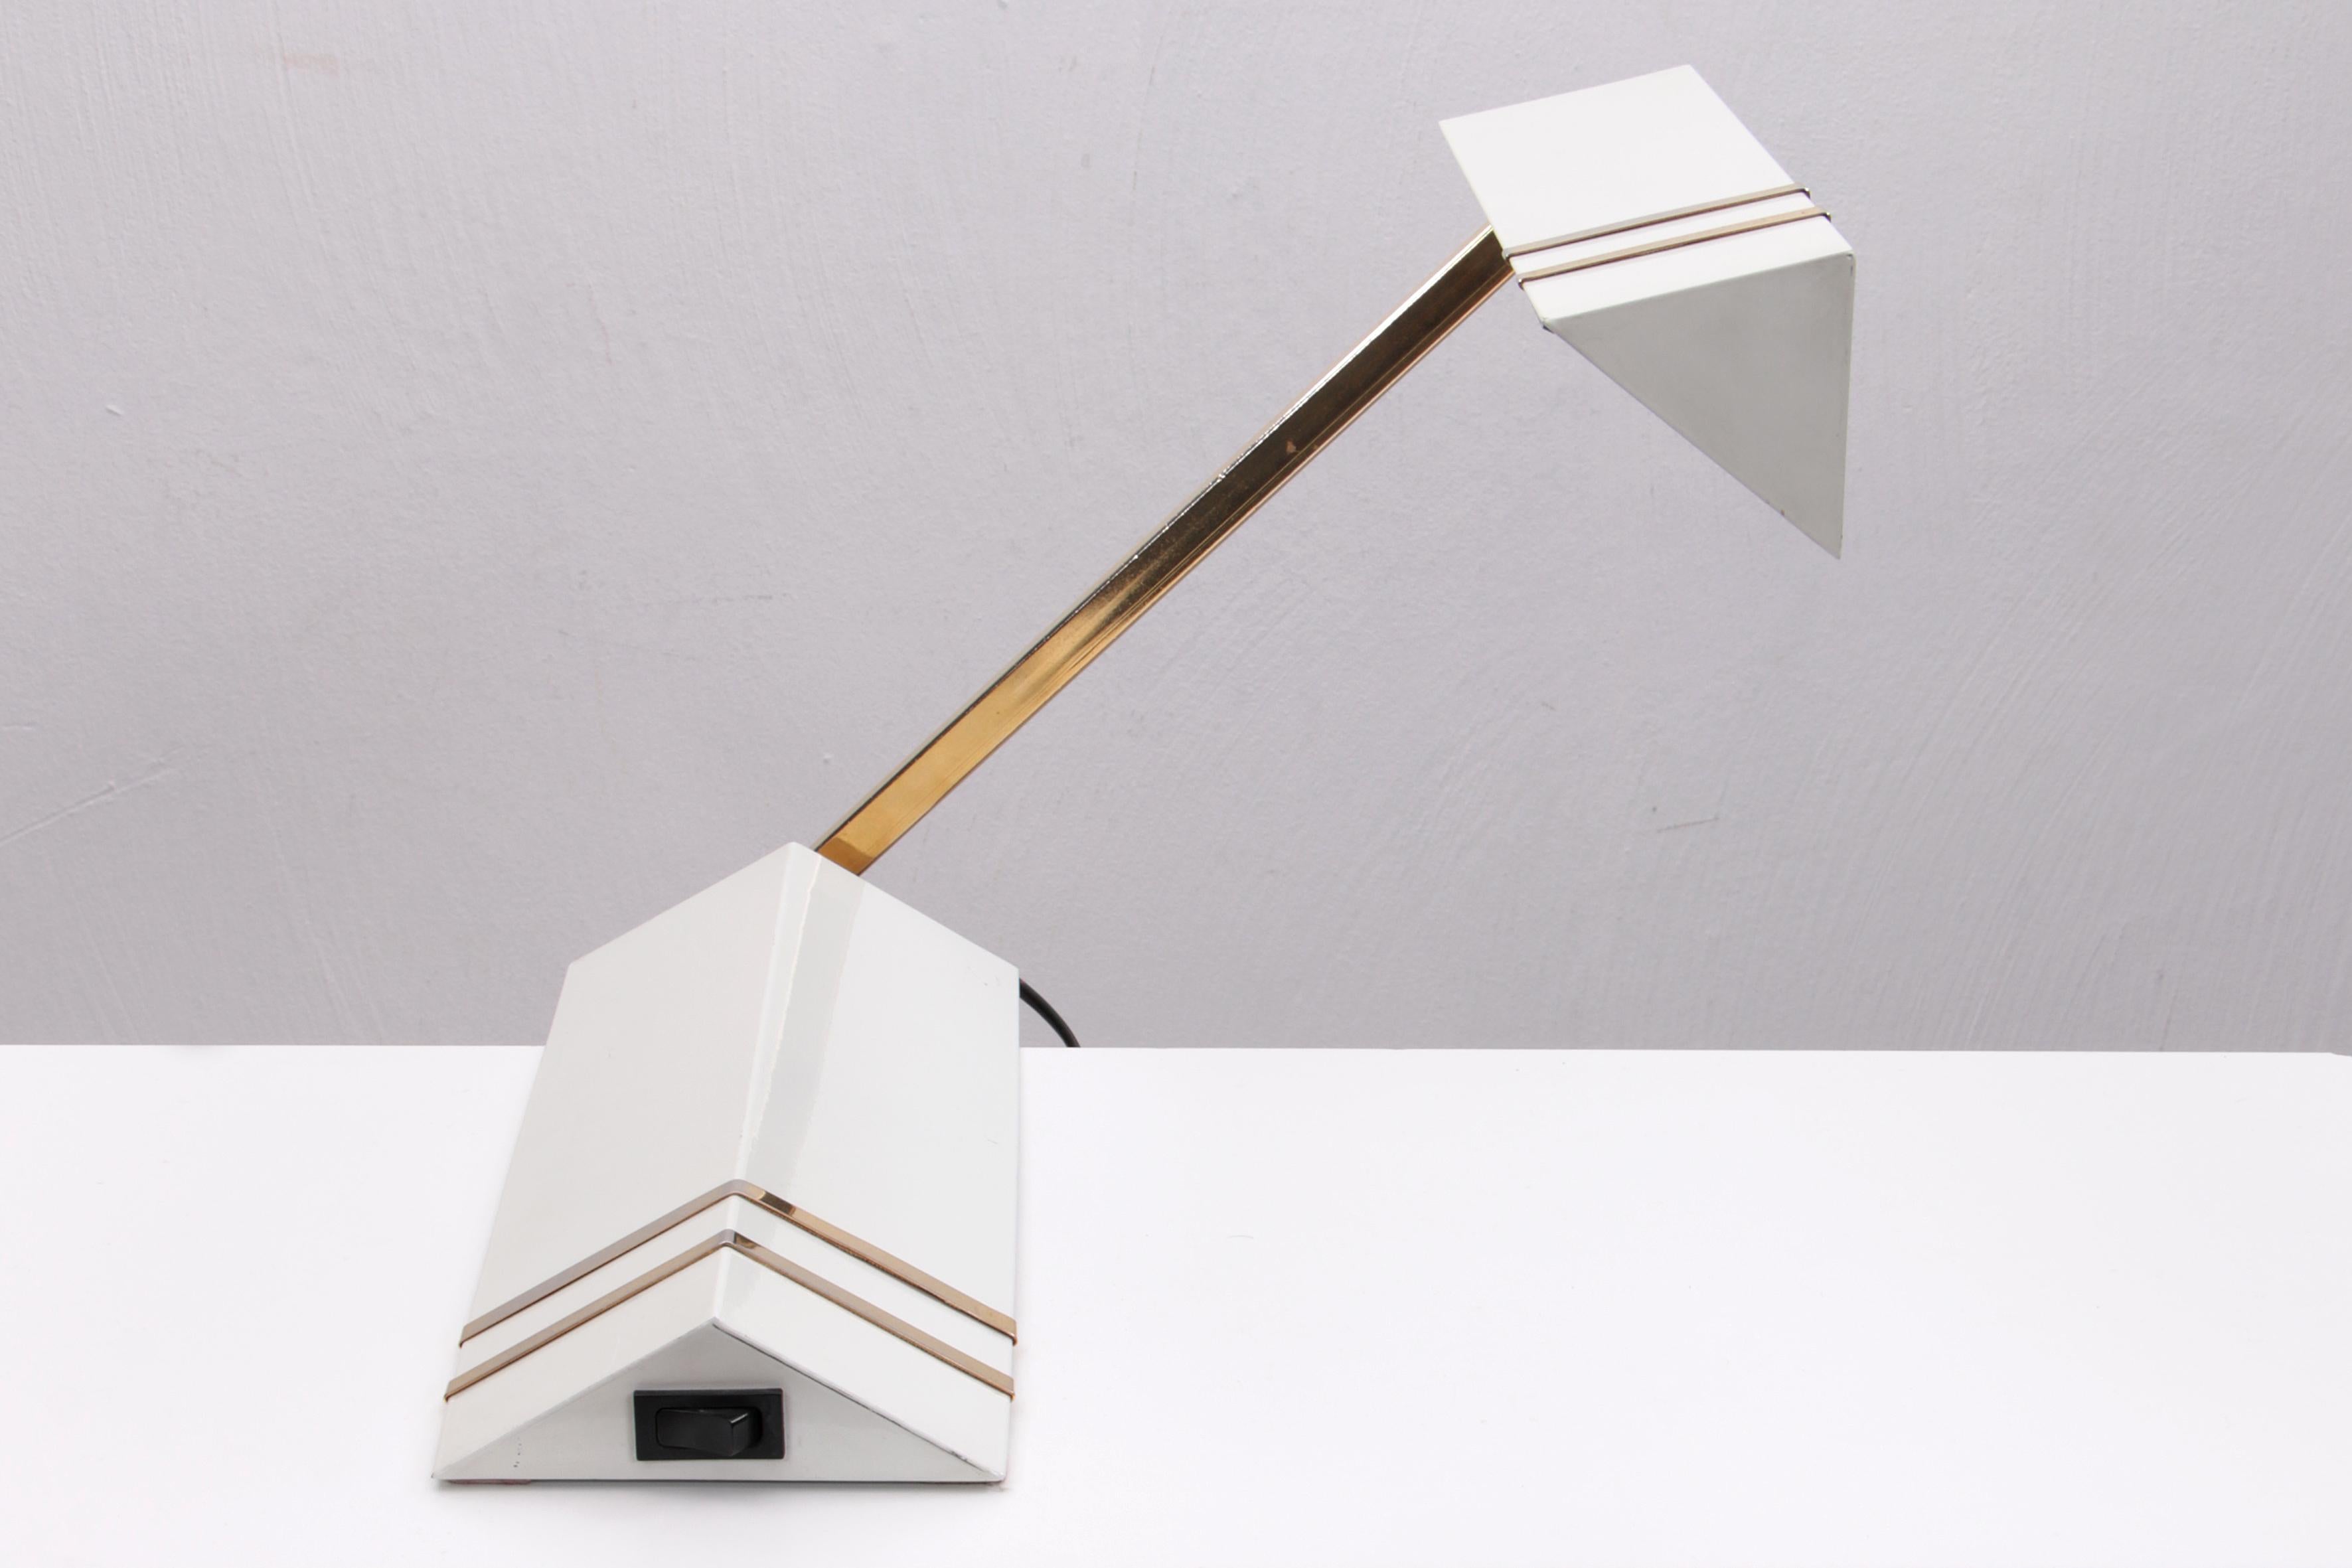 Beautiful white colored desk lamp with brass details.
The base and the shade are made of metal.
There is a switch on the side and the brass rod can also be moved.
Beautiful light through an aluminum reflector in the hood.
Sustainable: